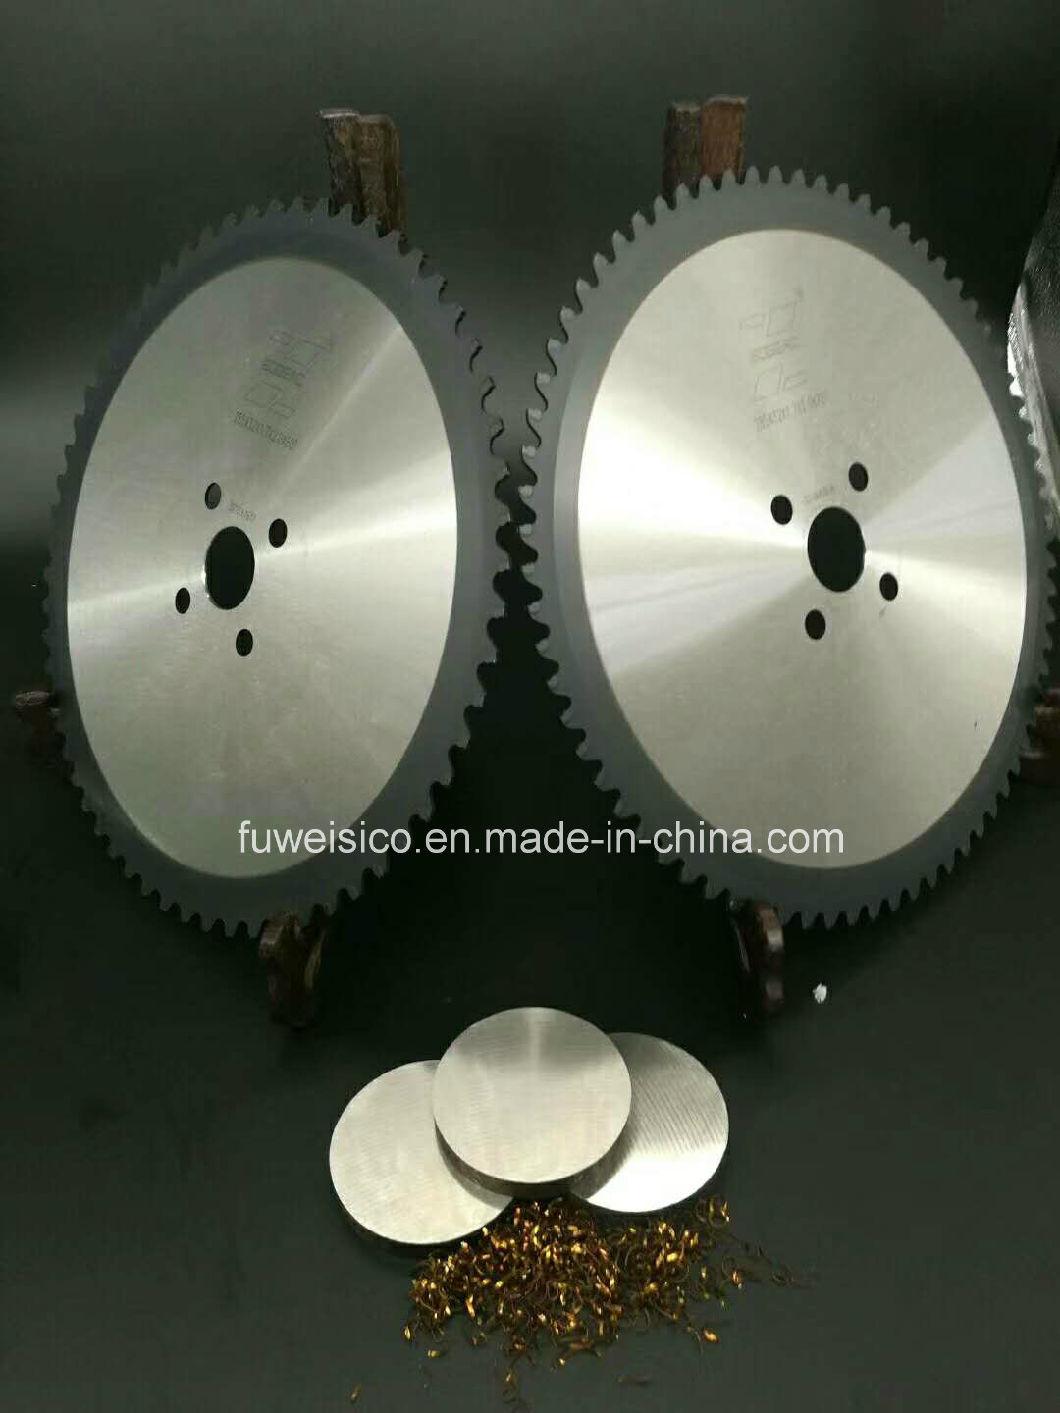 Best Quality Cold Saw Blade 285X72 Tooth to Cut Steel Bar